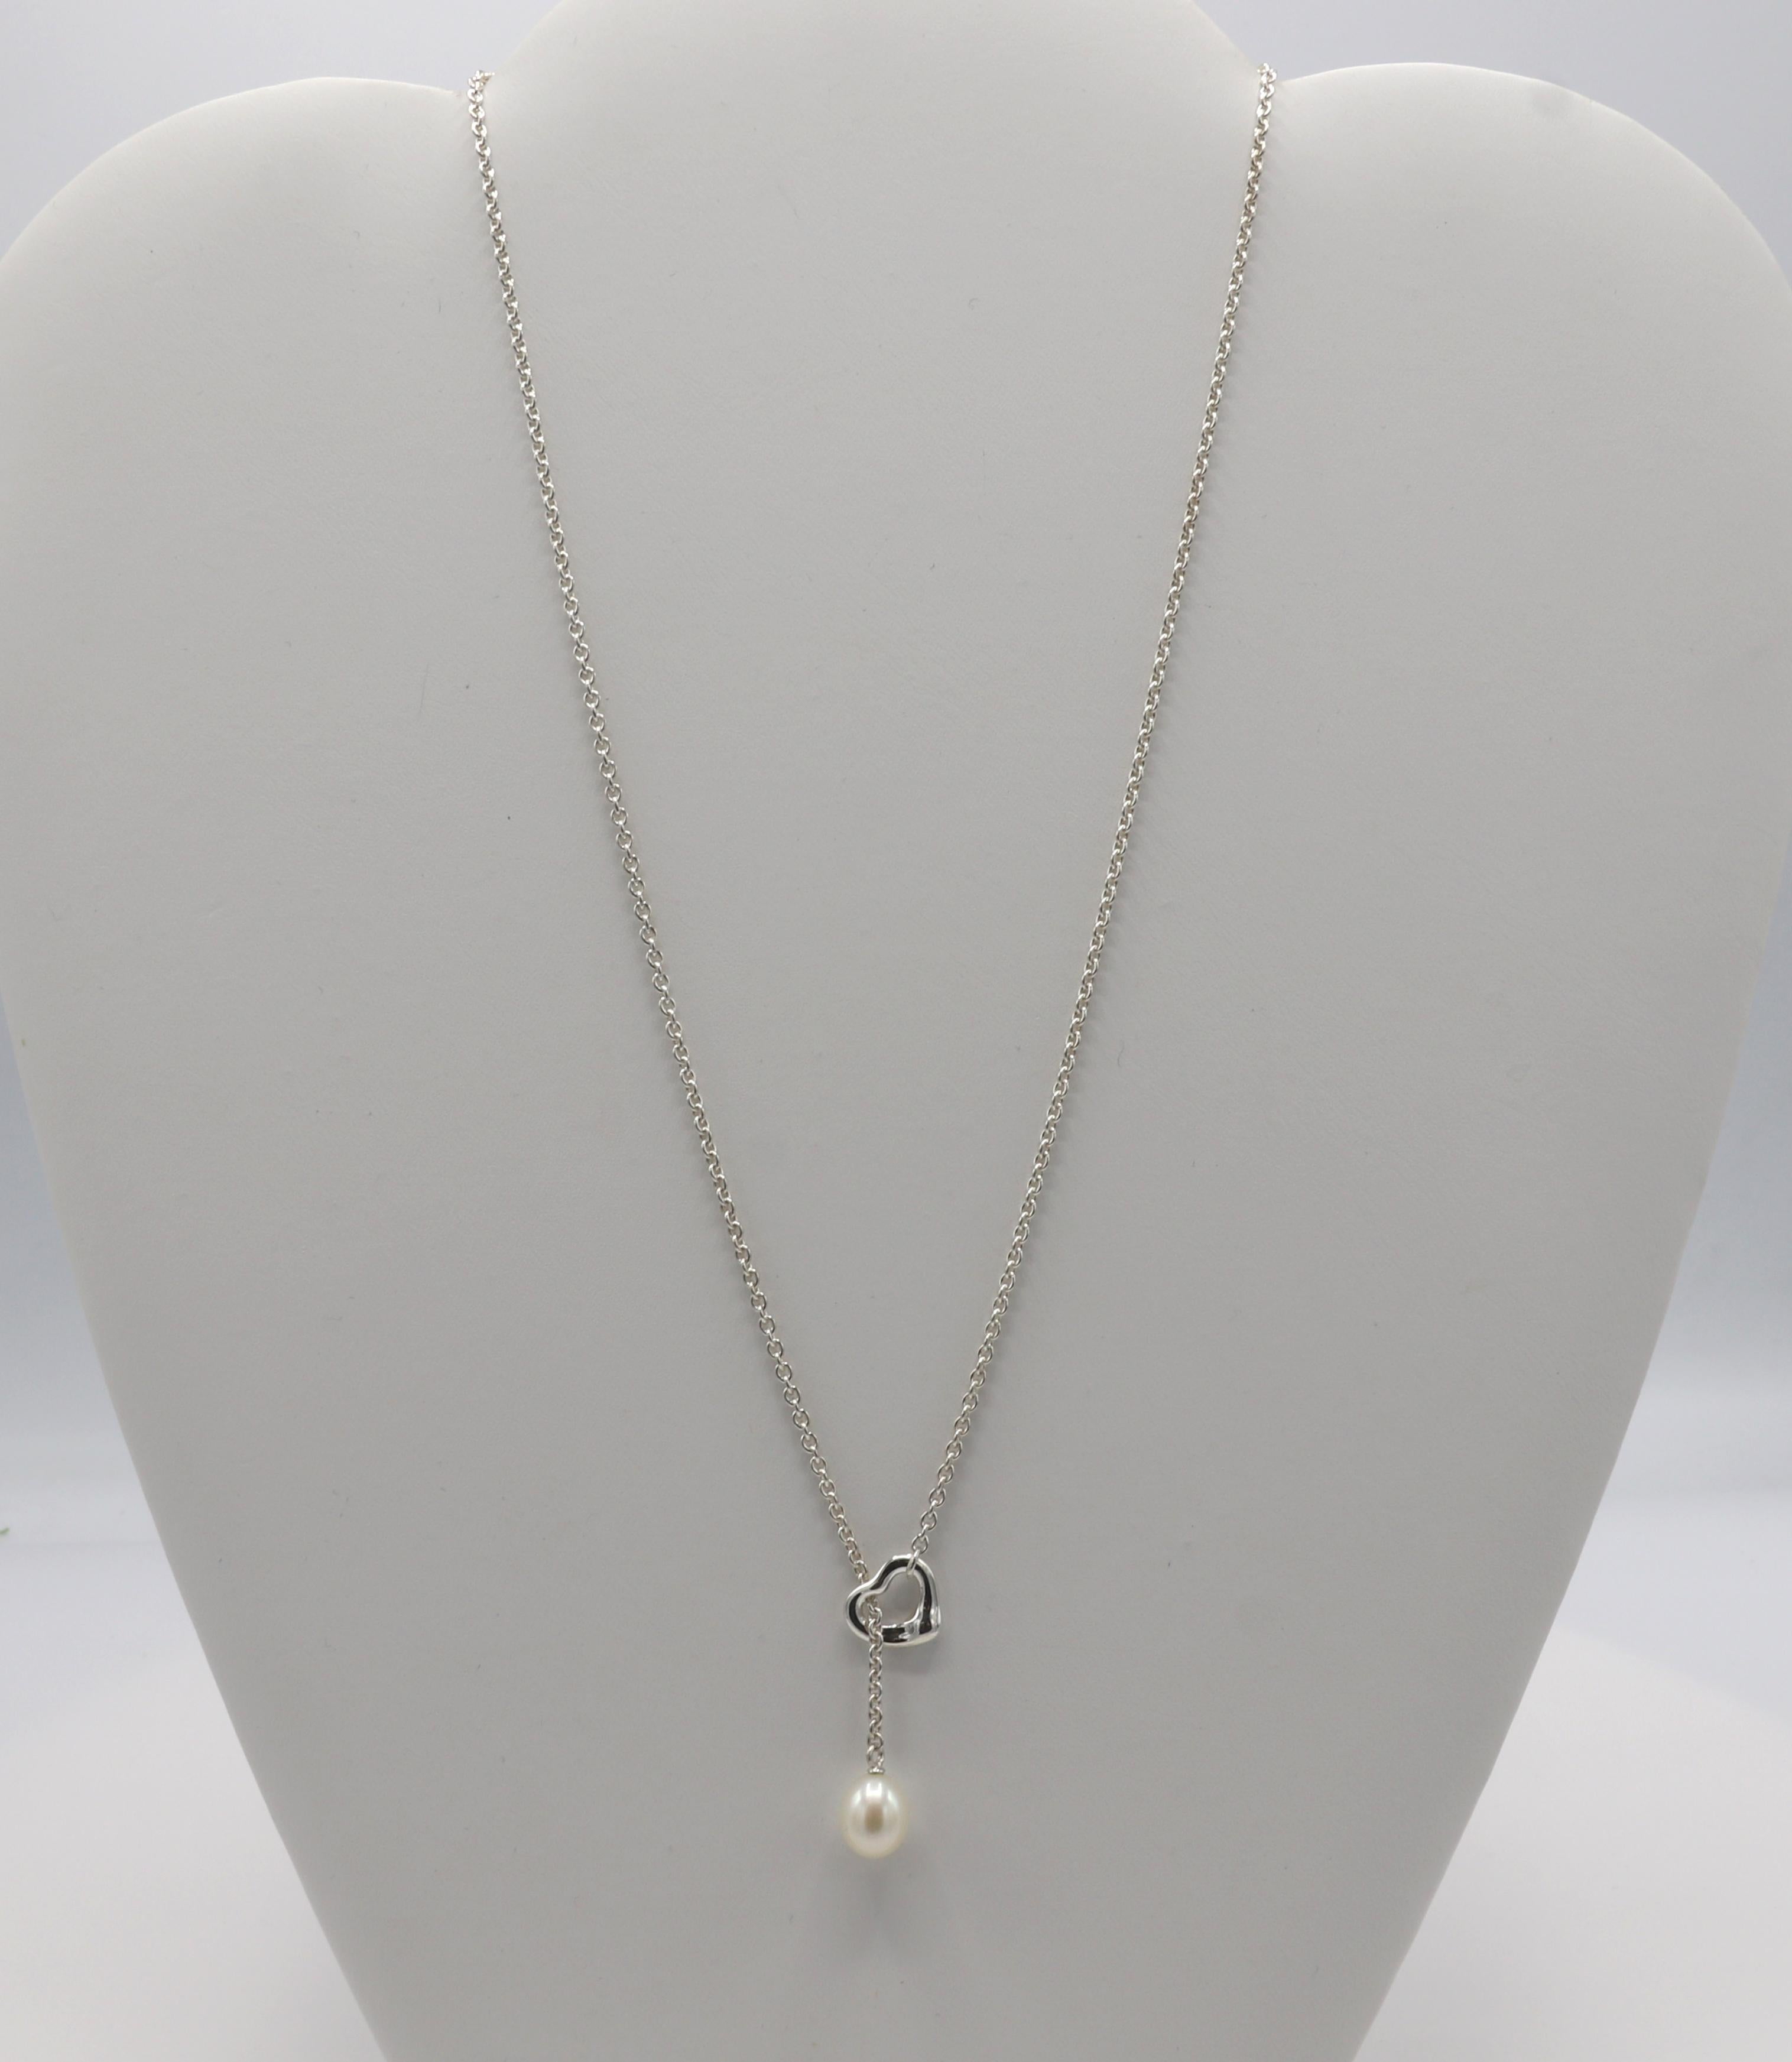 Tiffany & Co. Elsa Peretti Sterling Silver Open Heart Pearl Lariat Drop Necklace 
Metal: Sterling silver 925
Weight: 5.96 grams
Length: 19 inches
Pearl: 7.5 x 9mm
Heart: 10 x 9mm
Signed: Tiffany & Co. Peretti Spain Ag925